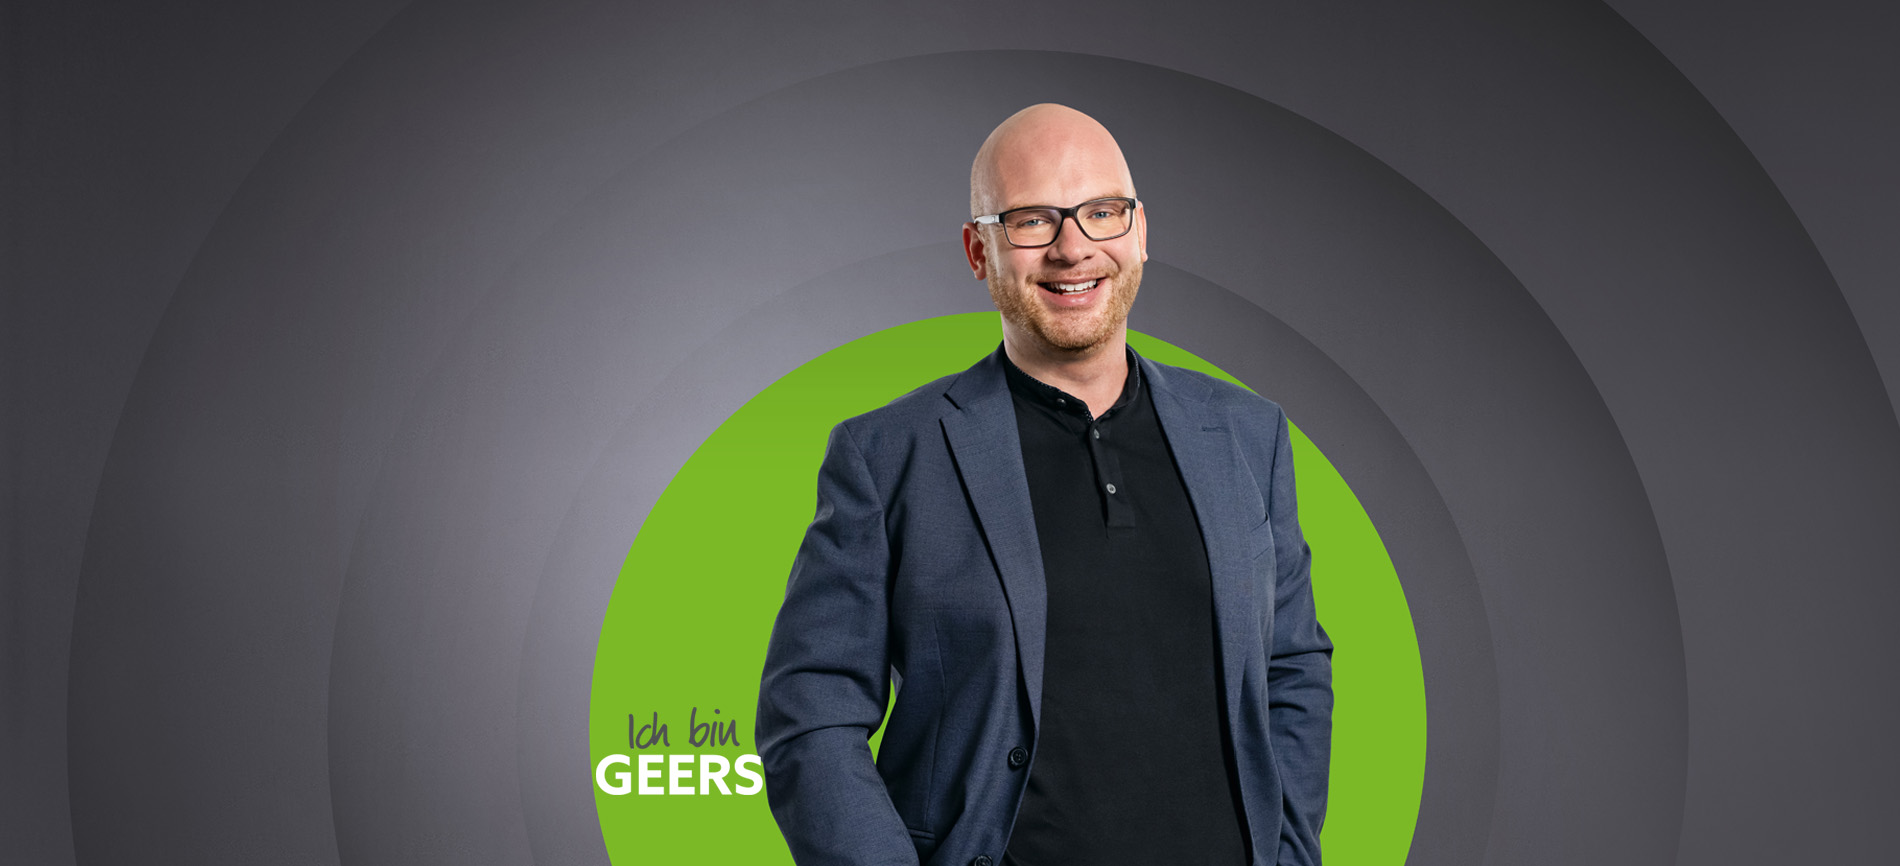 Andreas Z., Process Manager